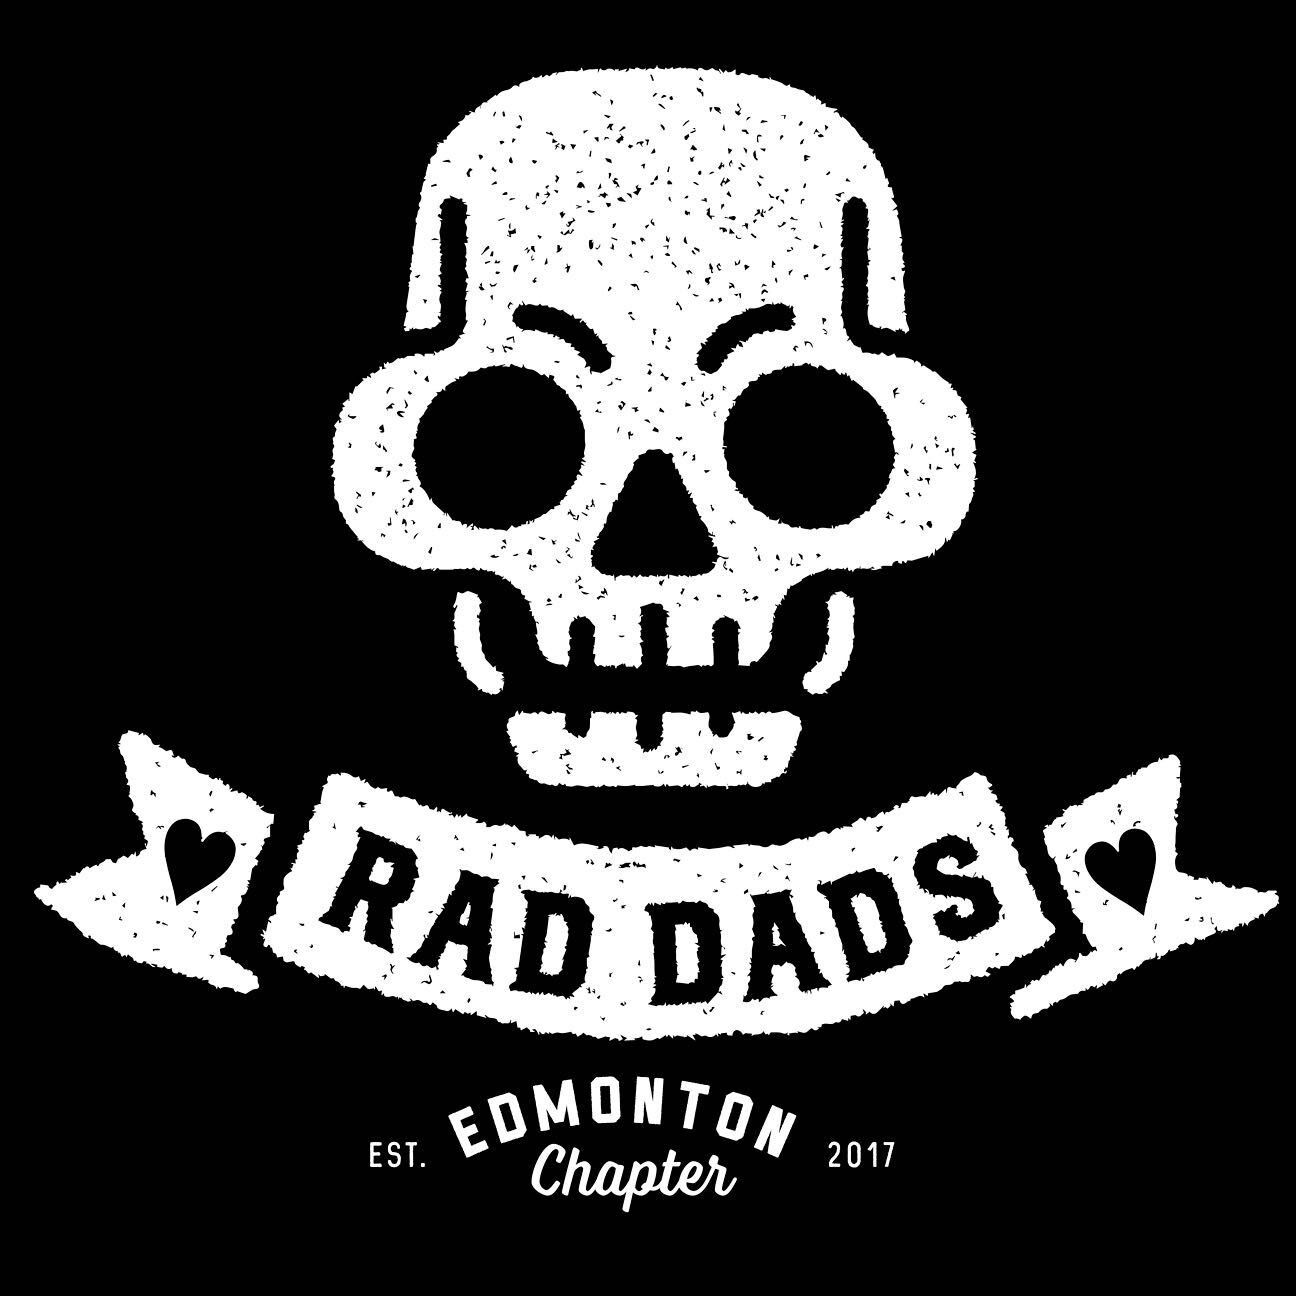 Check out Cris from That One Time On Tour&rsquo;s awesome interview on The Rad Dads Show!
Now up on Road Dog Supply!